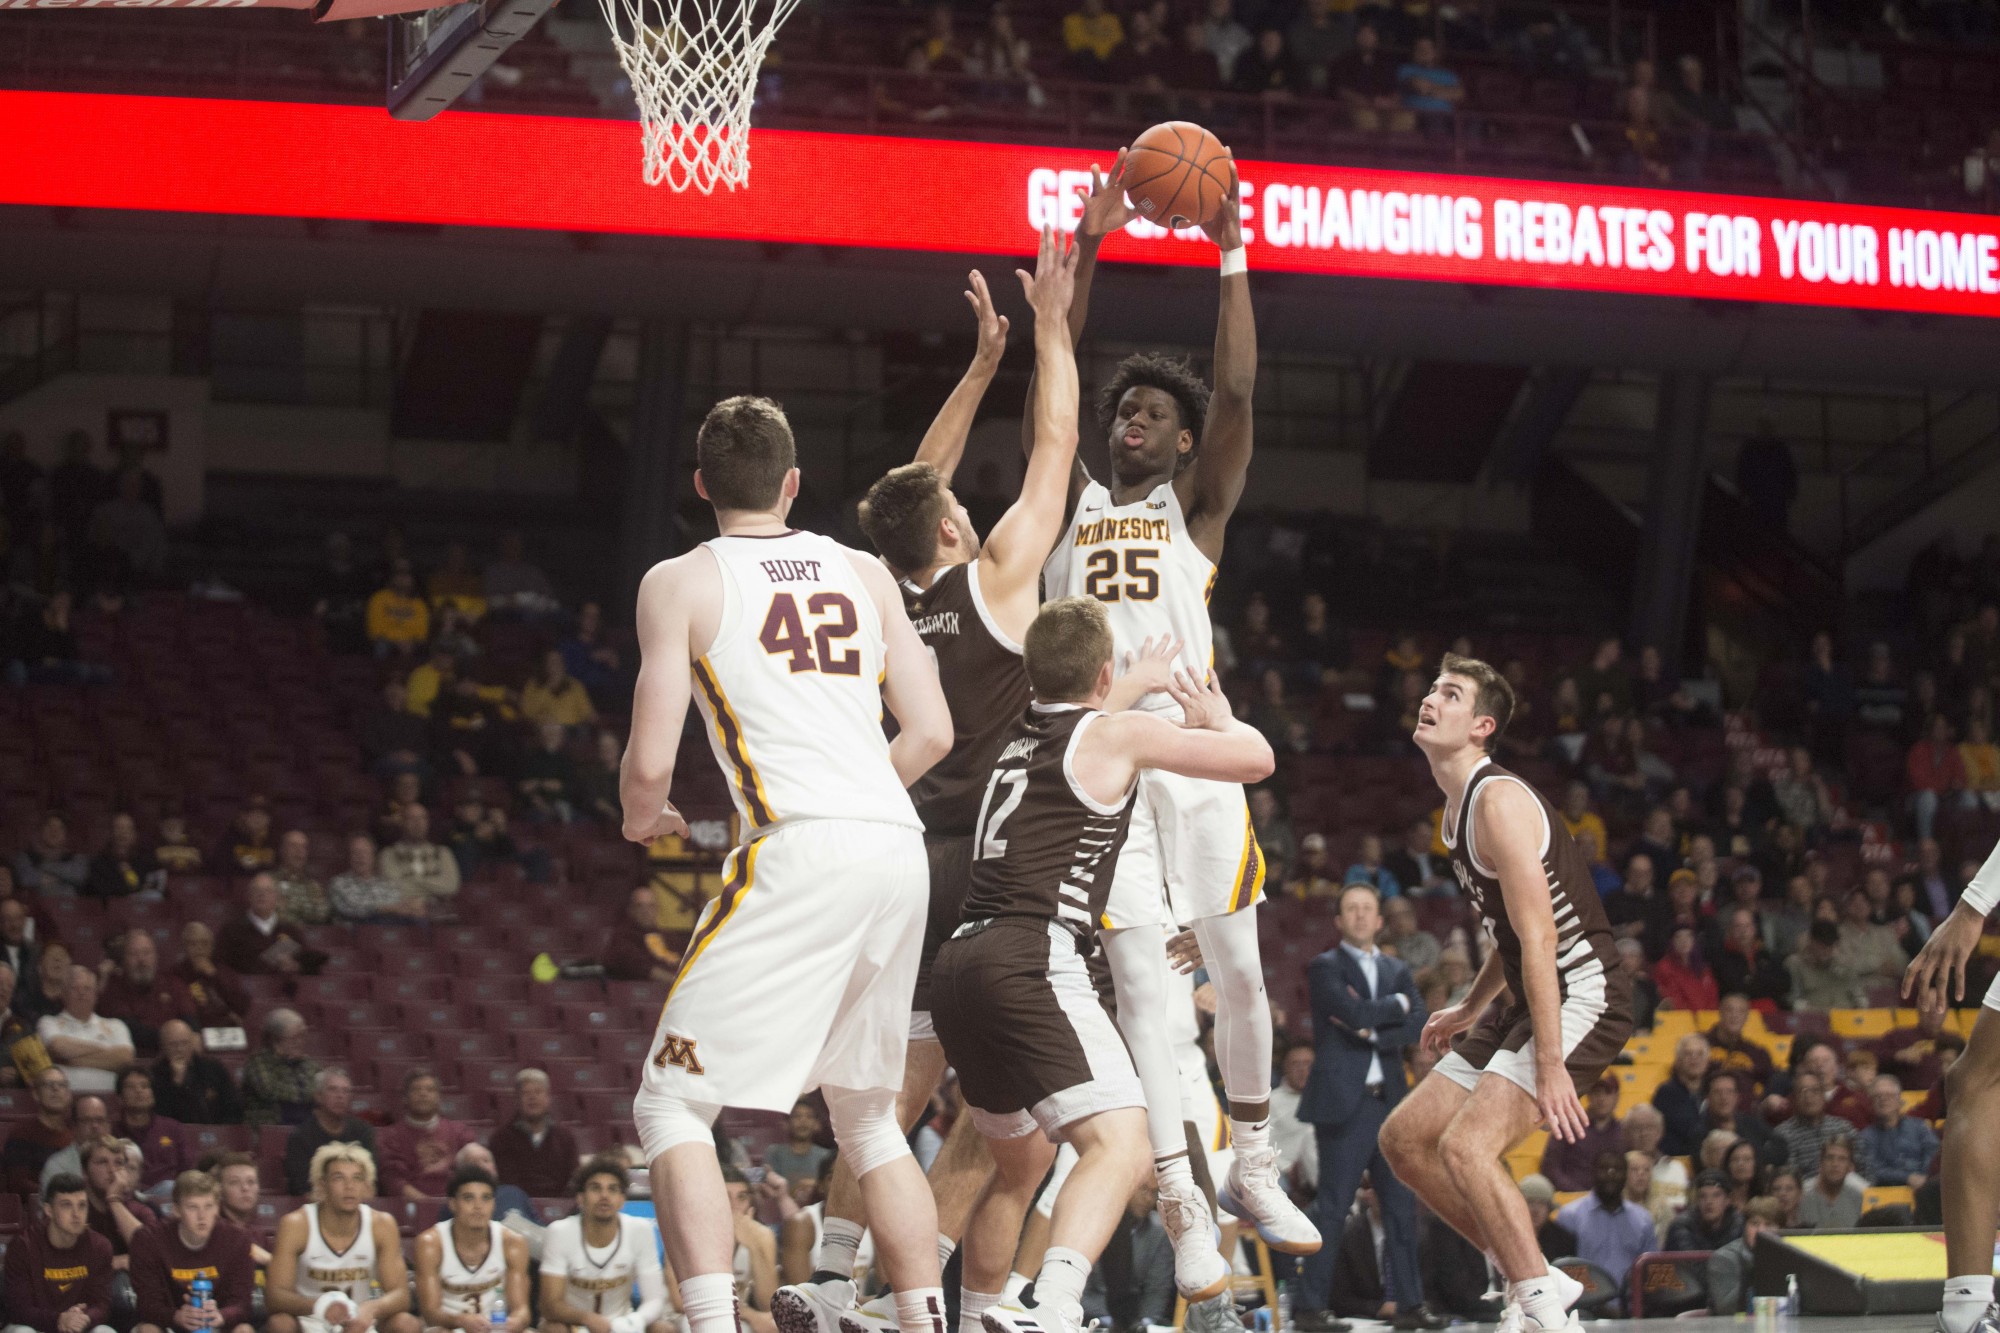 Center Daniel Oturu jumps for a rebound during the Gophers exhibition game against Southwest Minnesota State at Williams Arena on Monday, Oct 28. The Gophers won 73-48. (Sydni Rose / Minnesota Daily)